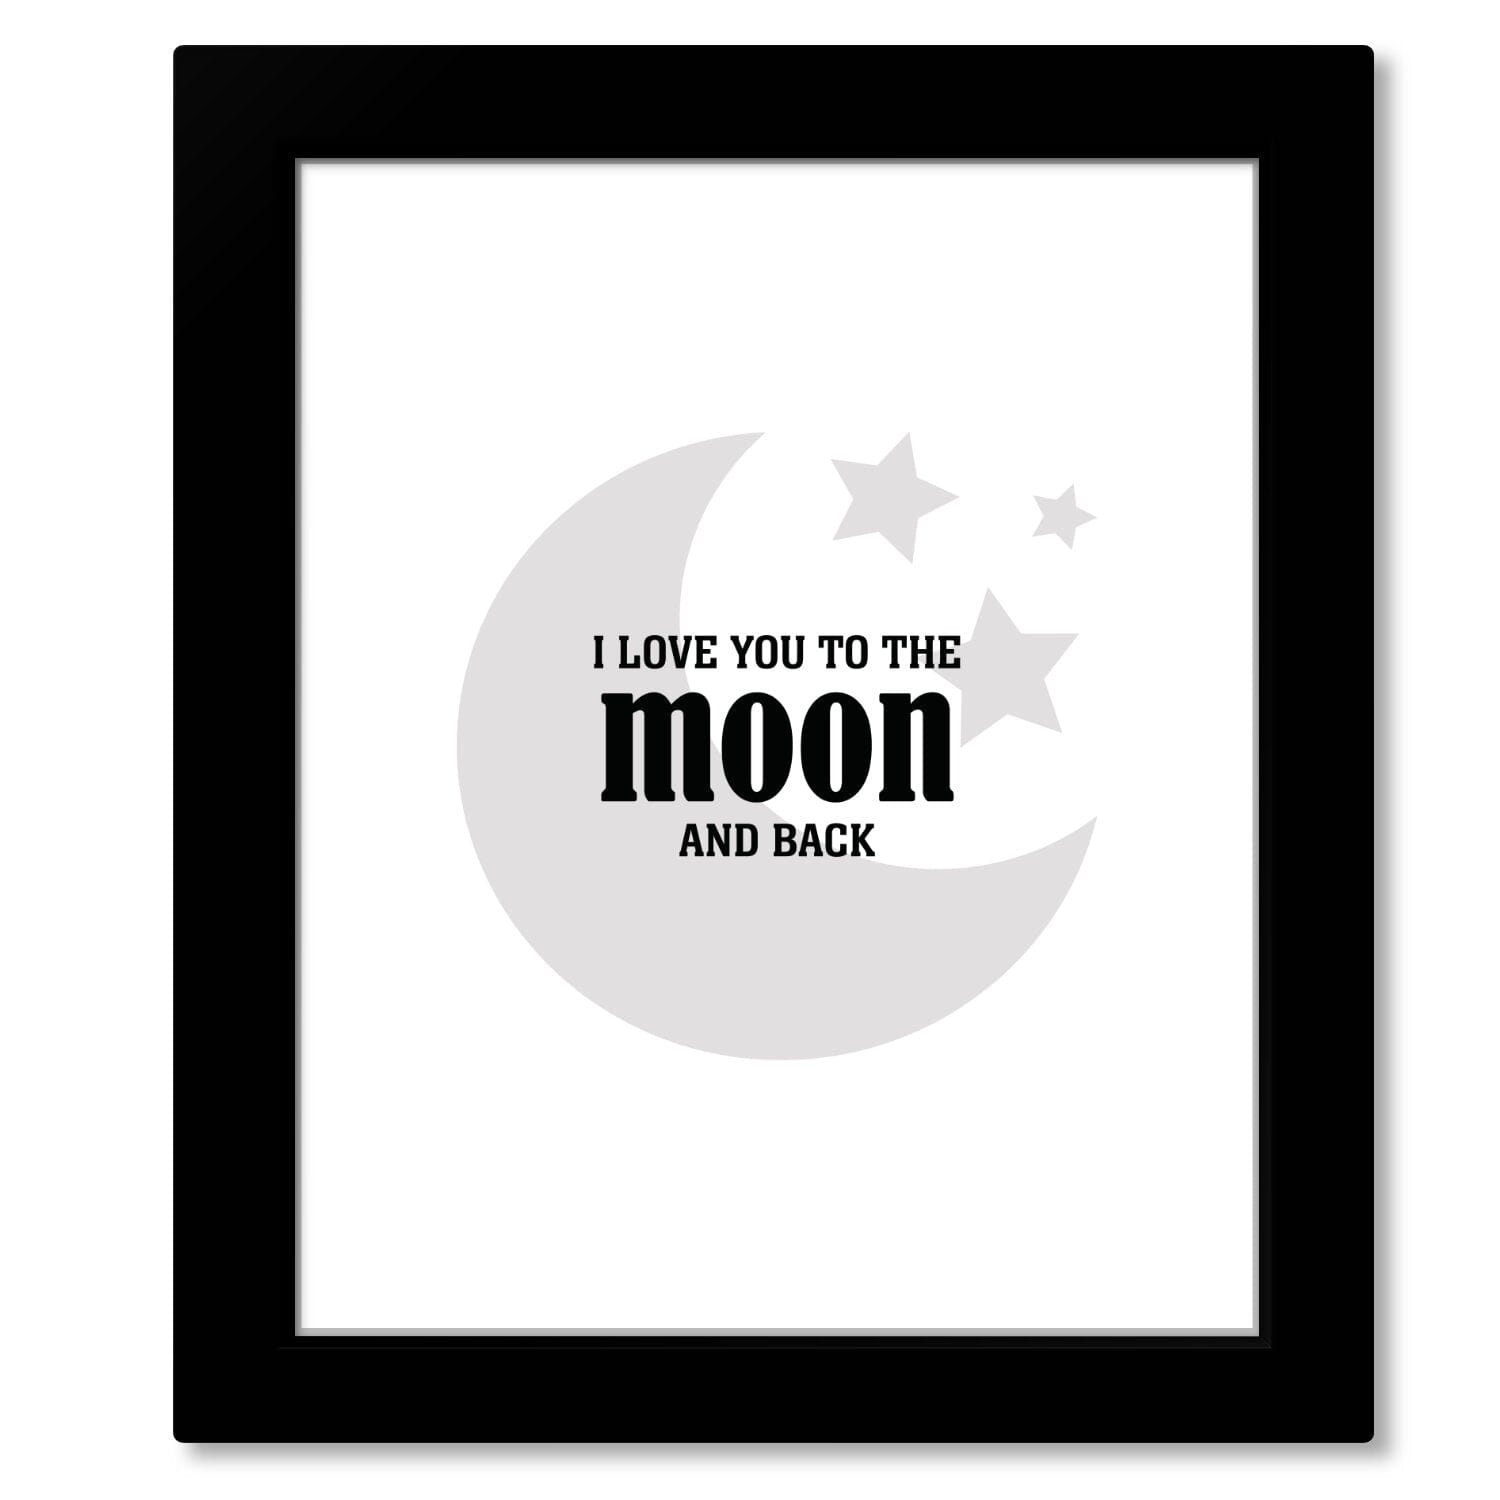 I Love You to the Moon and Back - Wise and Witty Art Wise and Wiseass Quotes Song Lyrics Art 8x10 Framed Print 